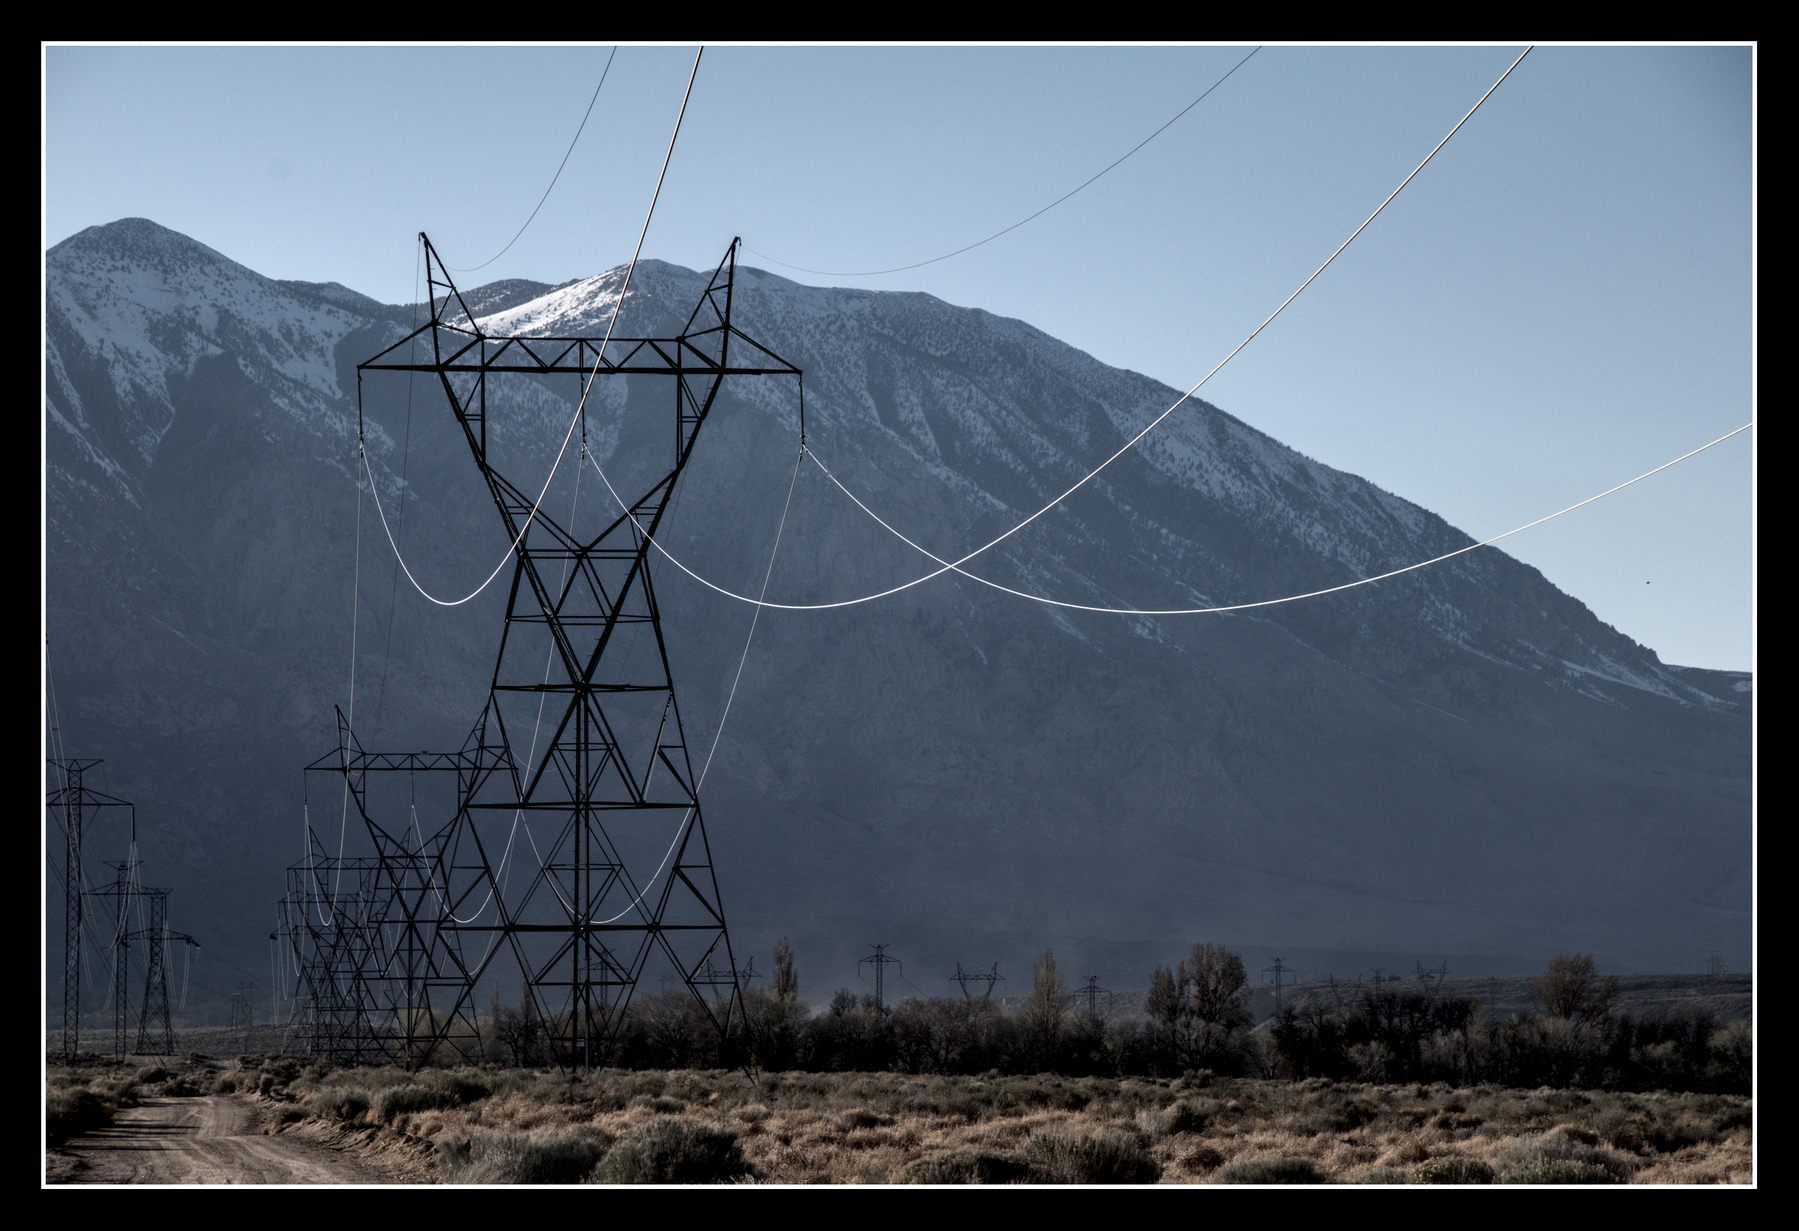 High-tension power lines run towards mountains in the background.